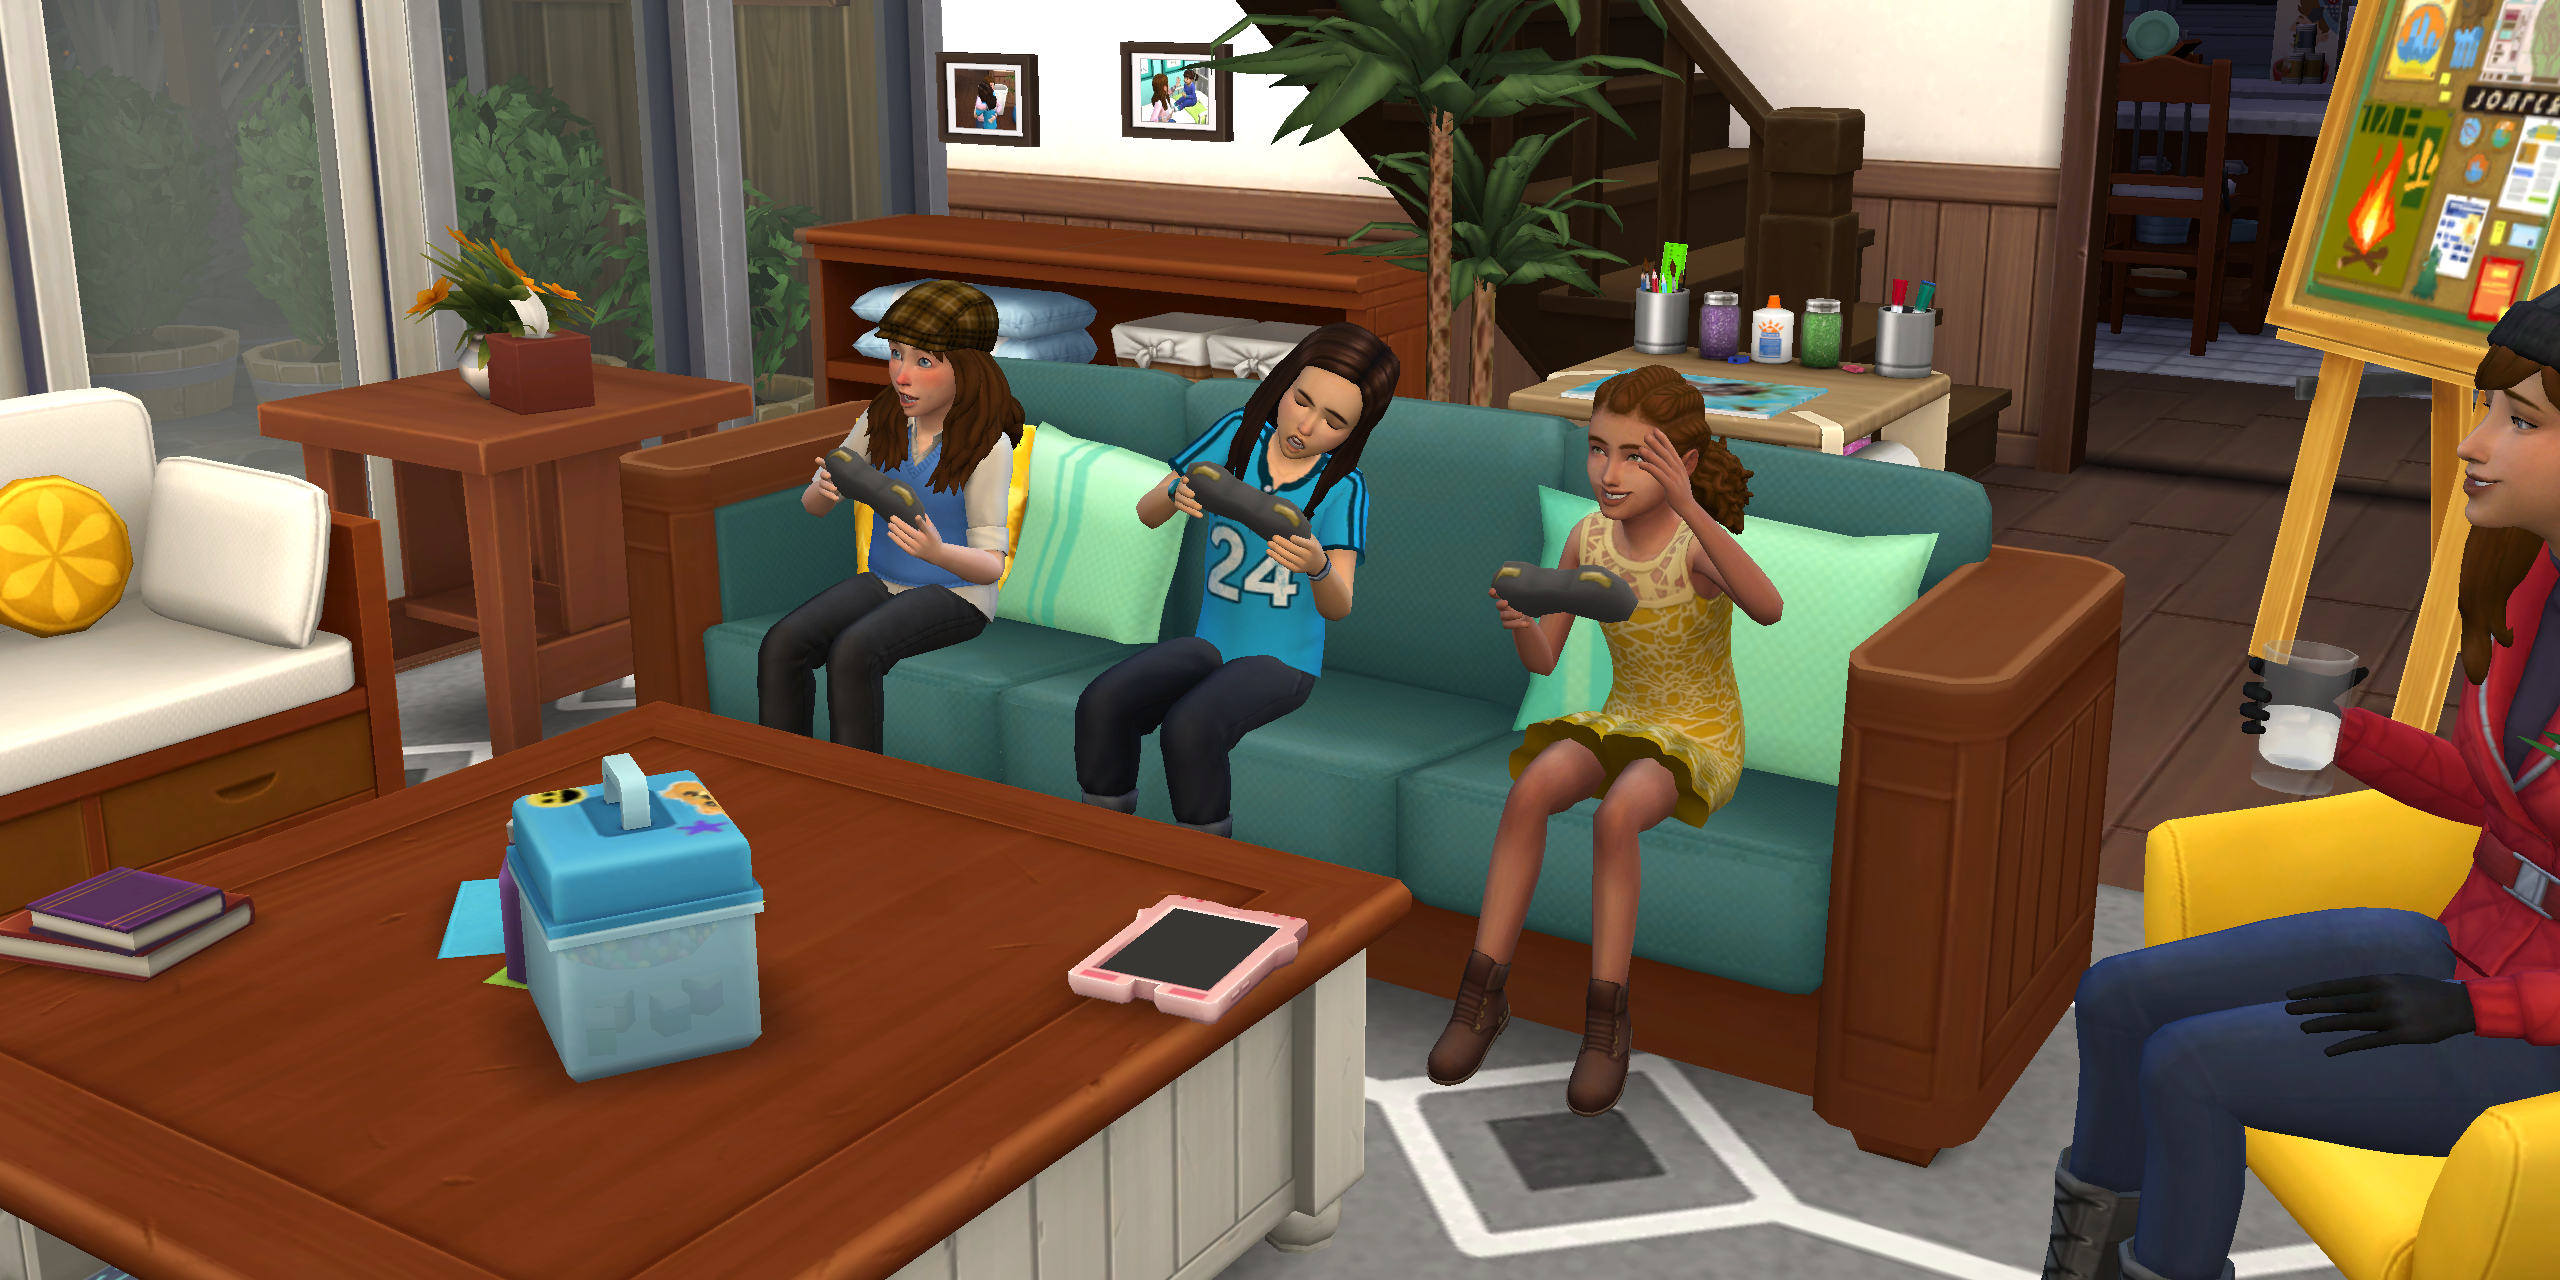 The Sims 4 children sit together and play videogames in the living room